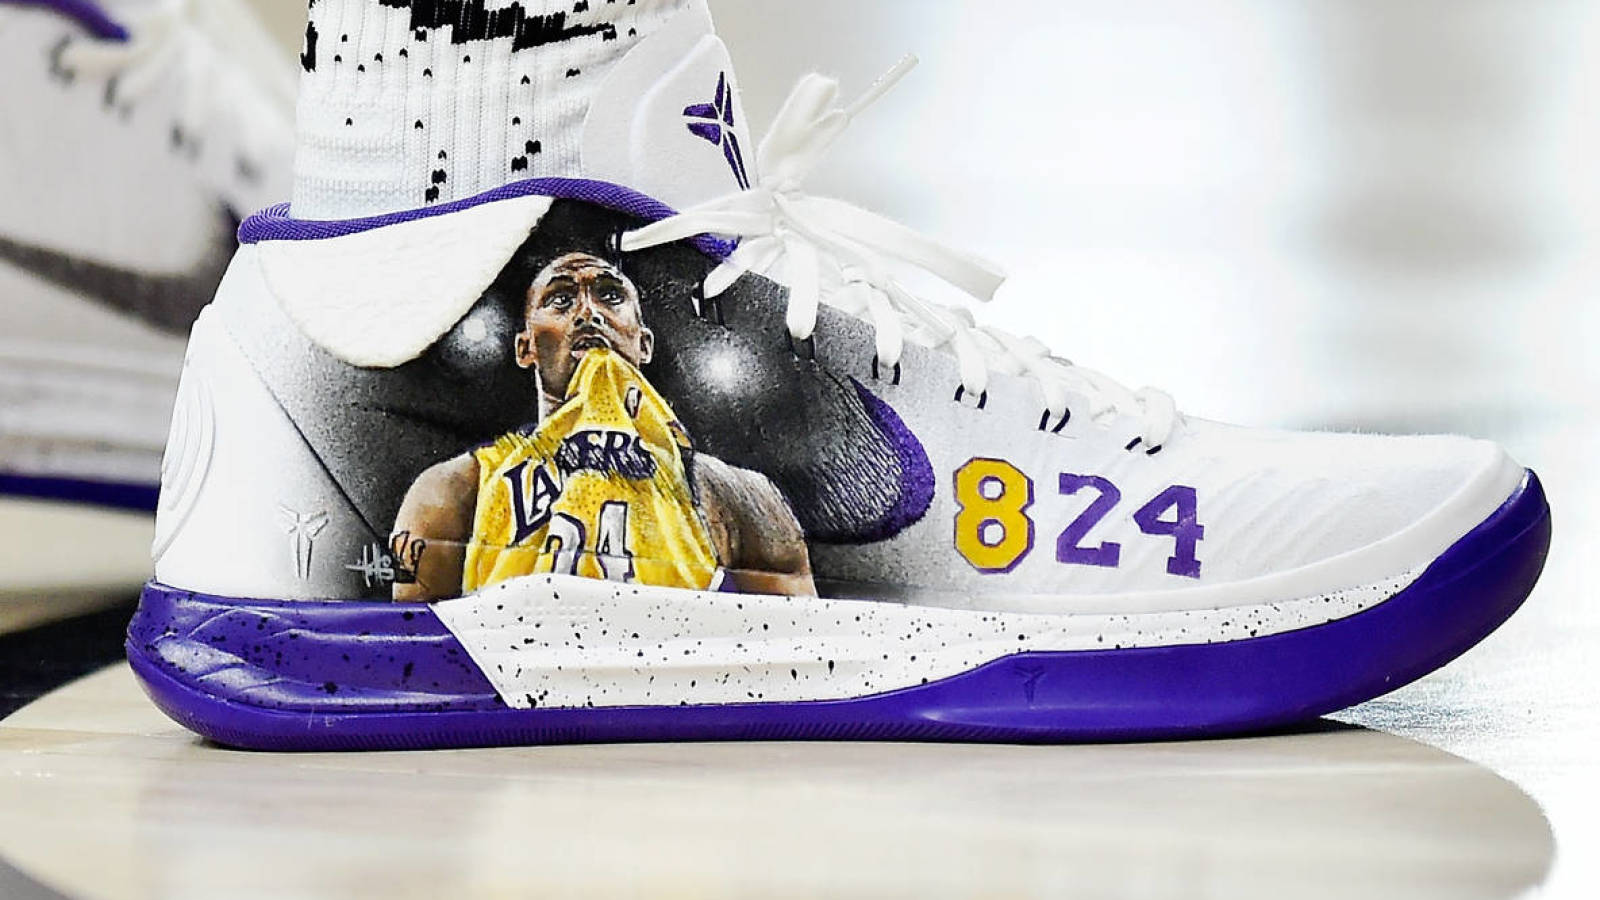 Kobe was planning to start his own shoe 